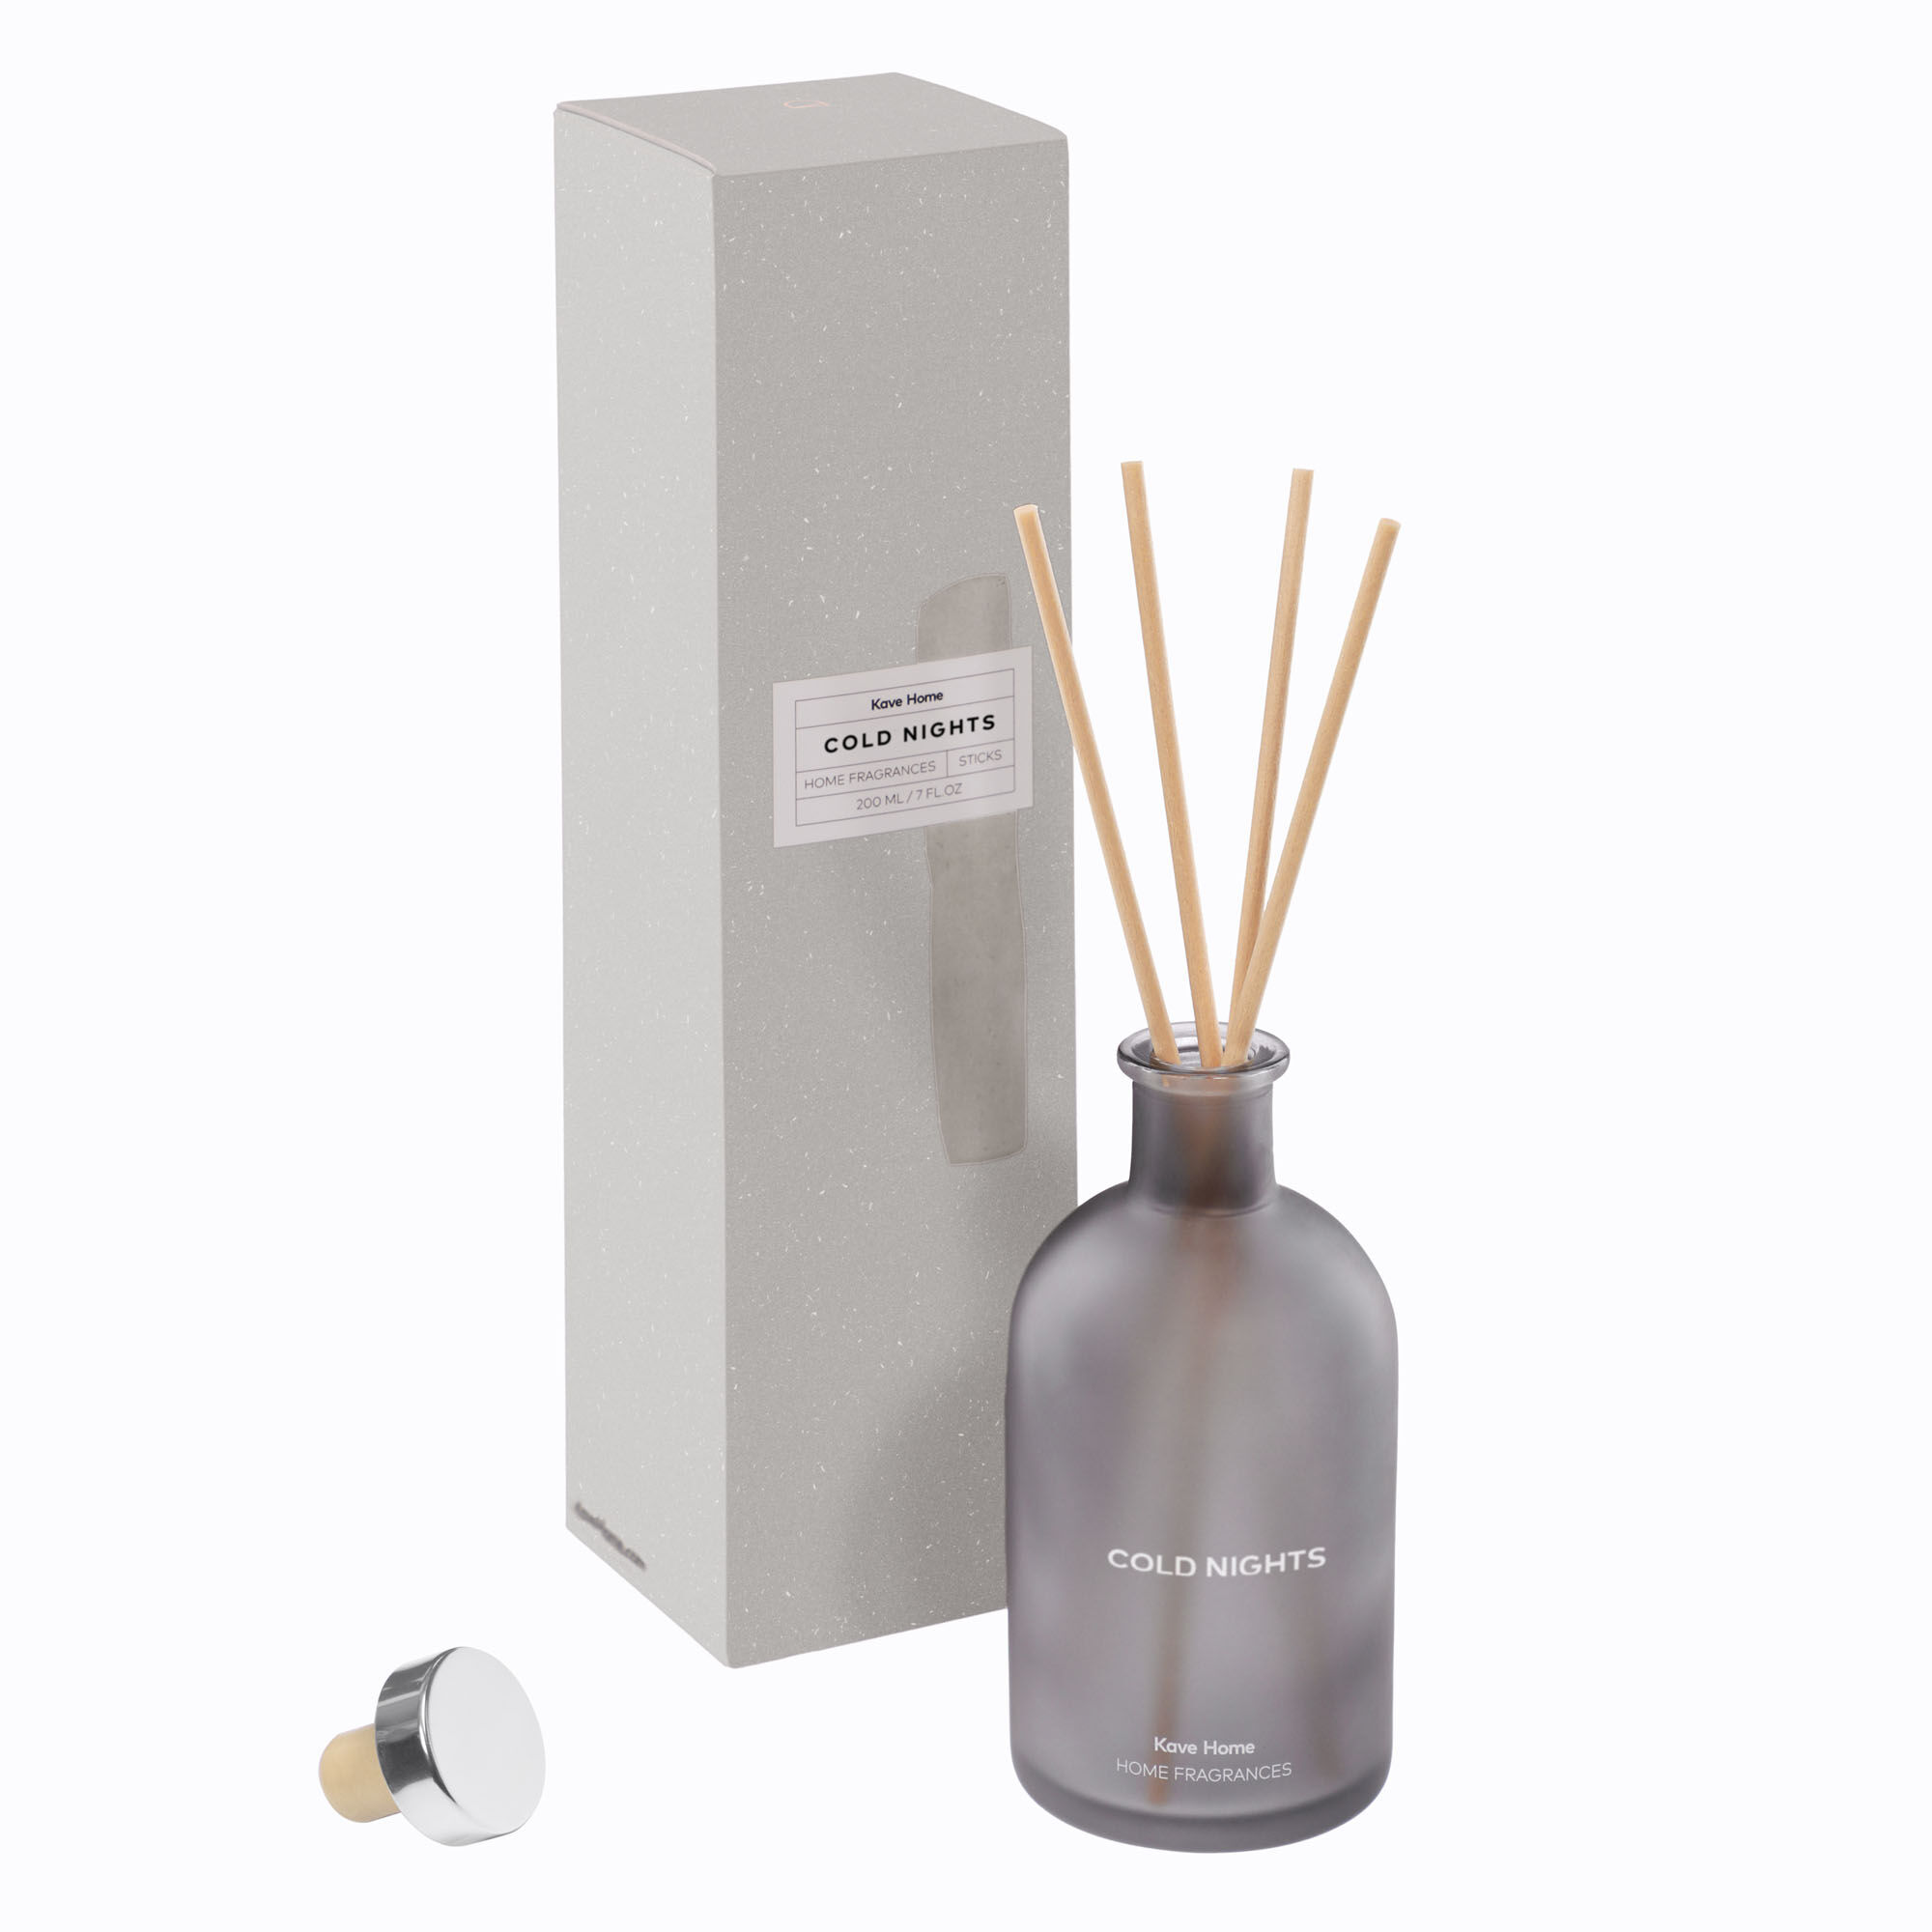 Kave Home Cold Nights grey stick diffuser 200 ml